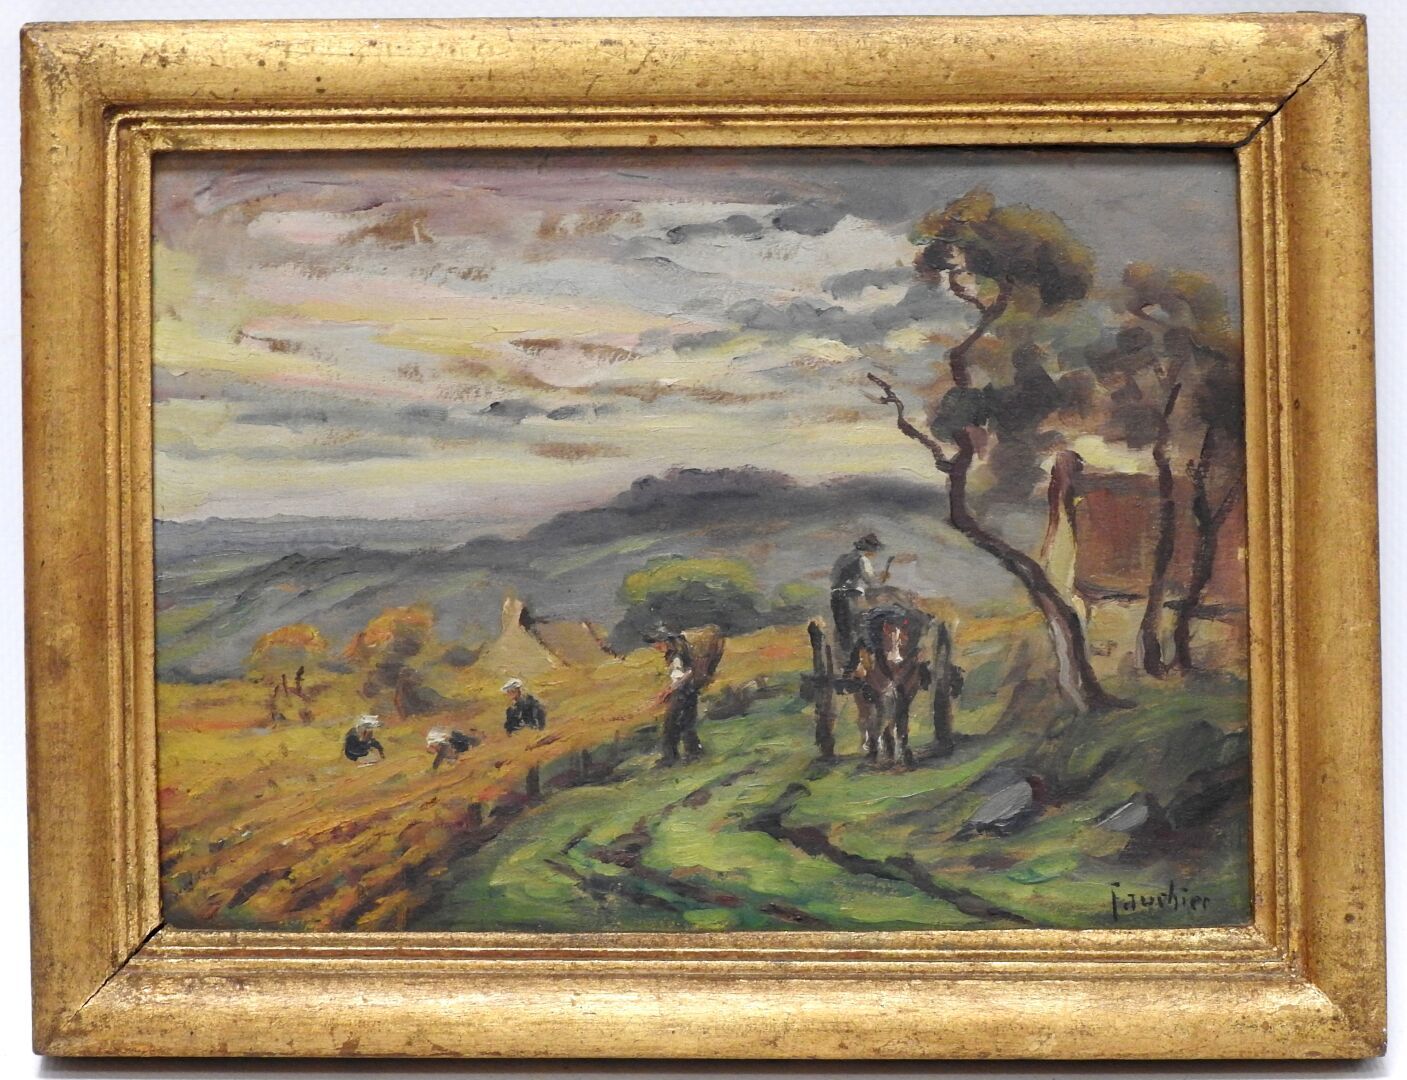 Null Charles FAUCHIER (1887-1965)
Work in the fields
Oil on cardboard. Signed lo&hellip;